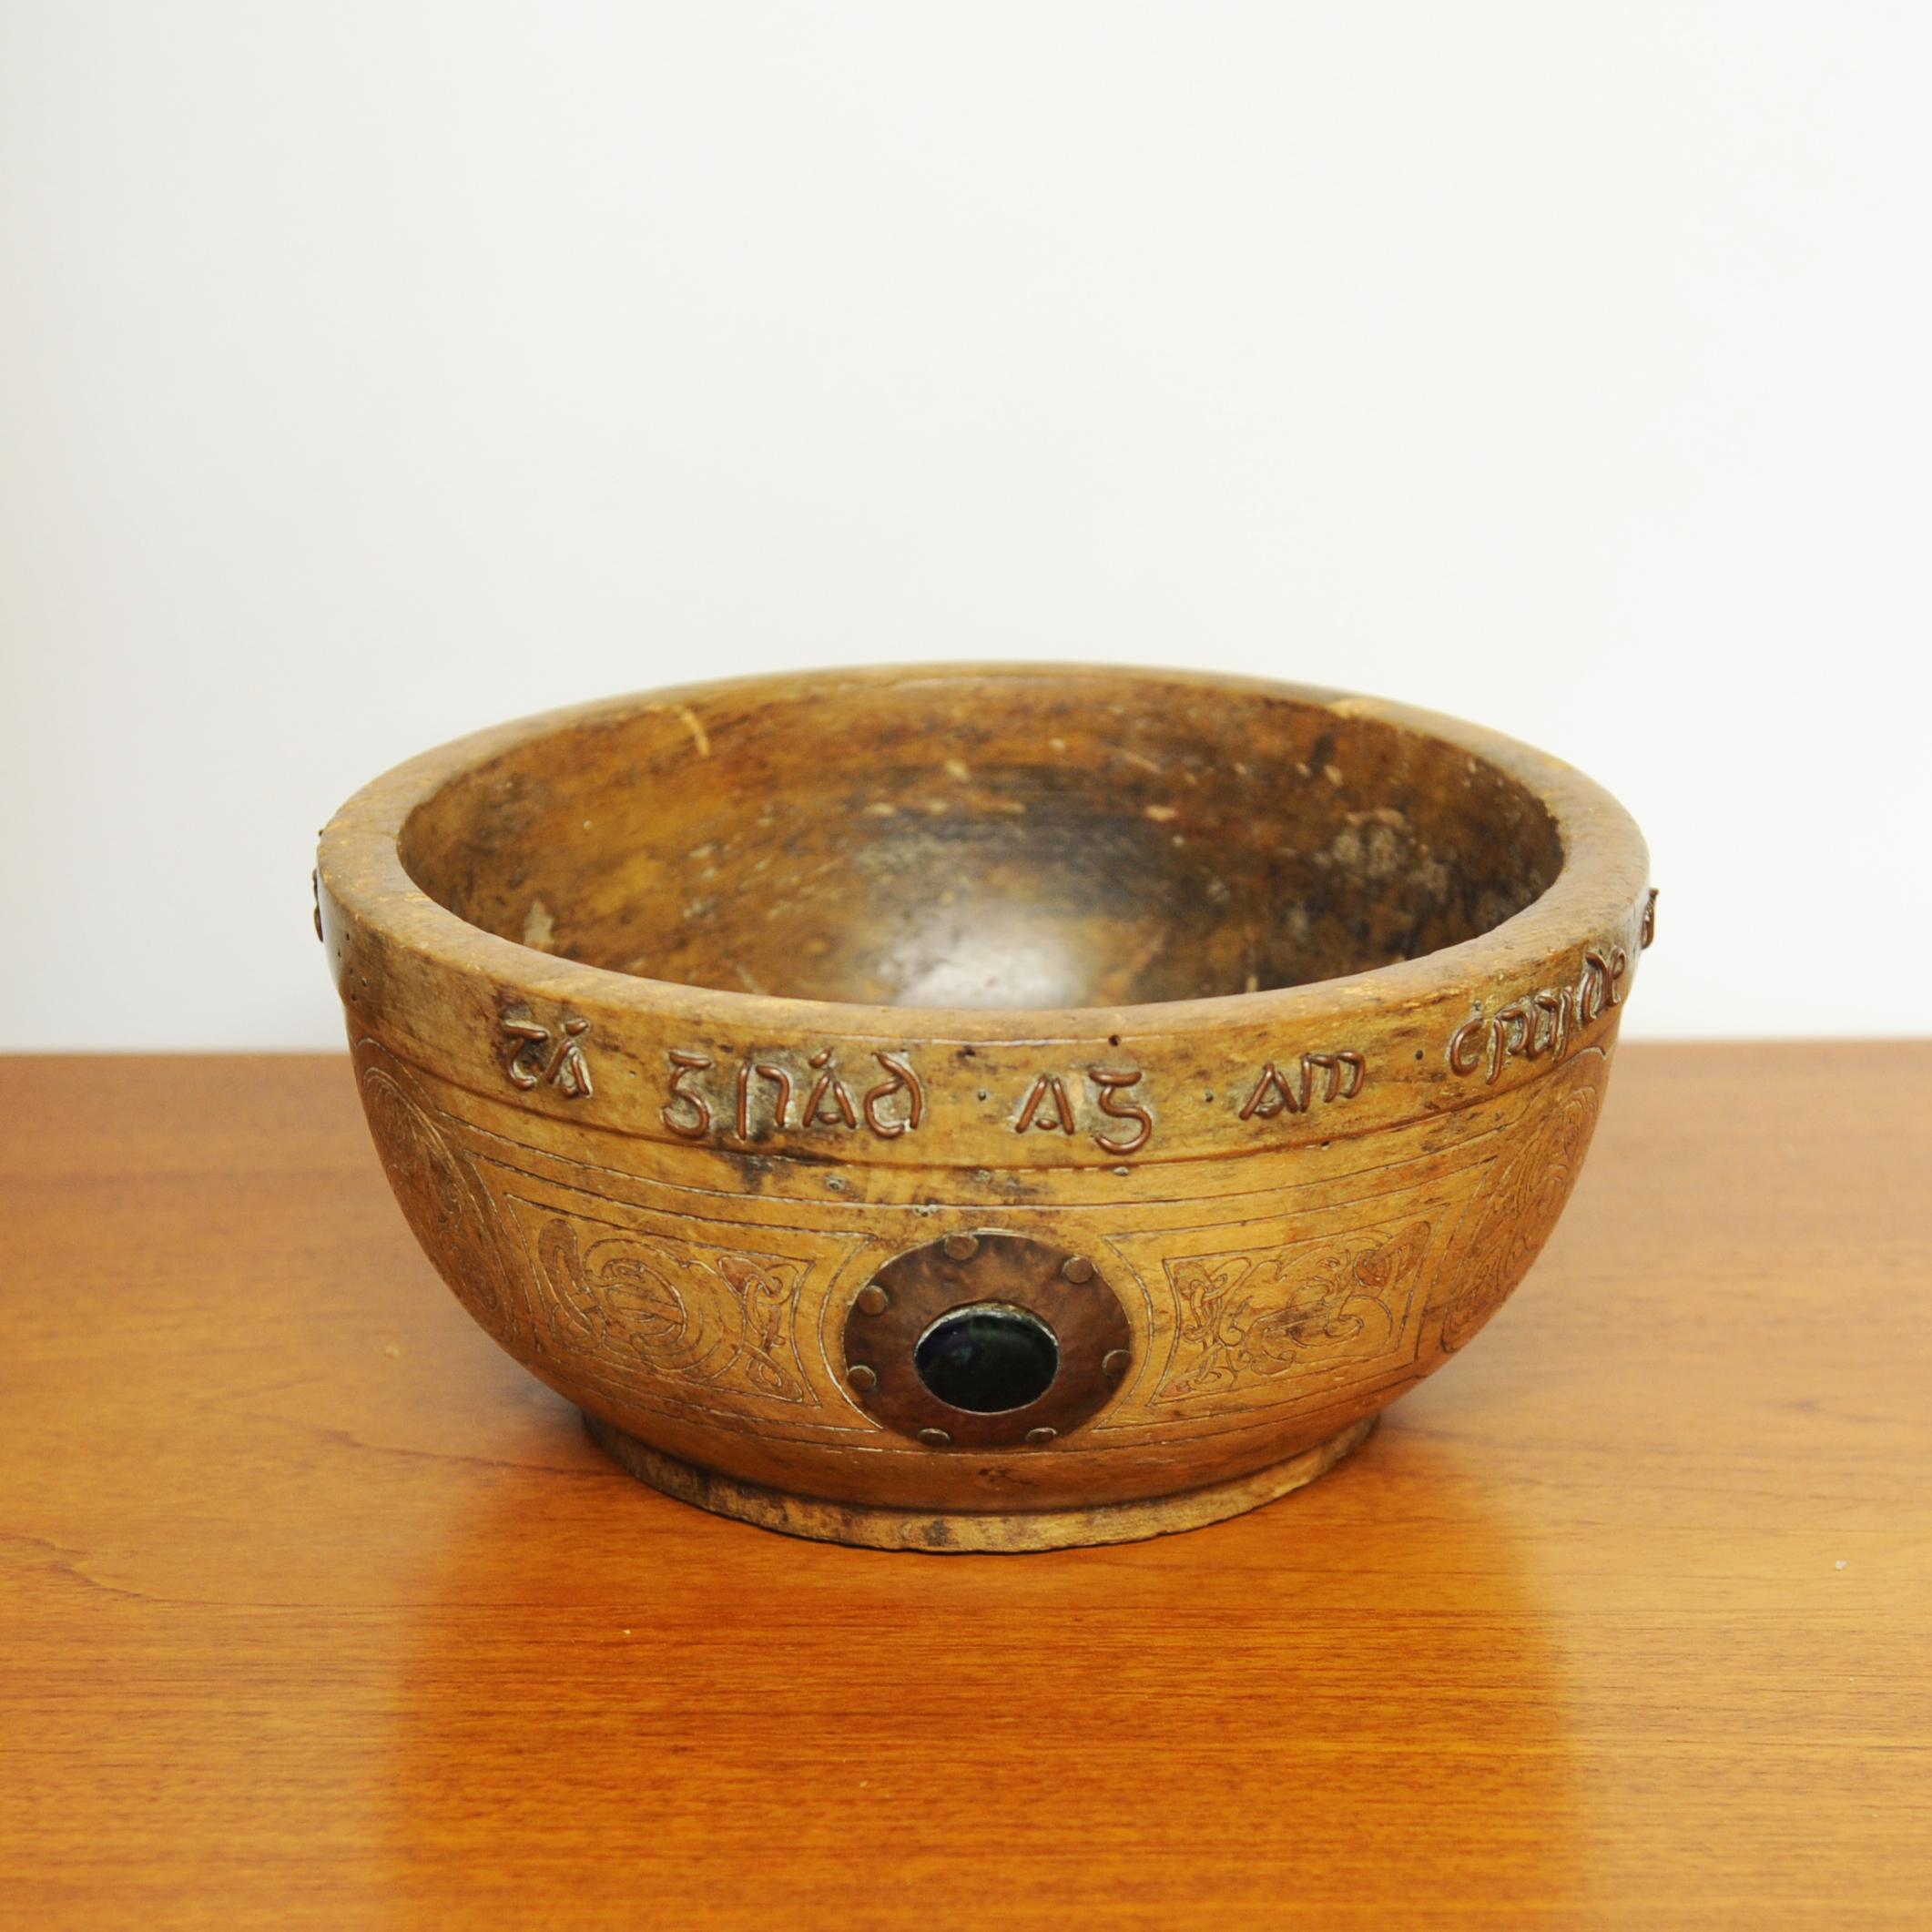 An early 20th Century Irish Arts and Crafts turned treen bowl with enamelled cabochons and wirework script.

Design Period - 1900 to 1910

Style - Arts and Crafts

Detailed Condition - Good with minimal defects.

Restoration and Damage Details -